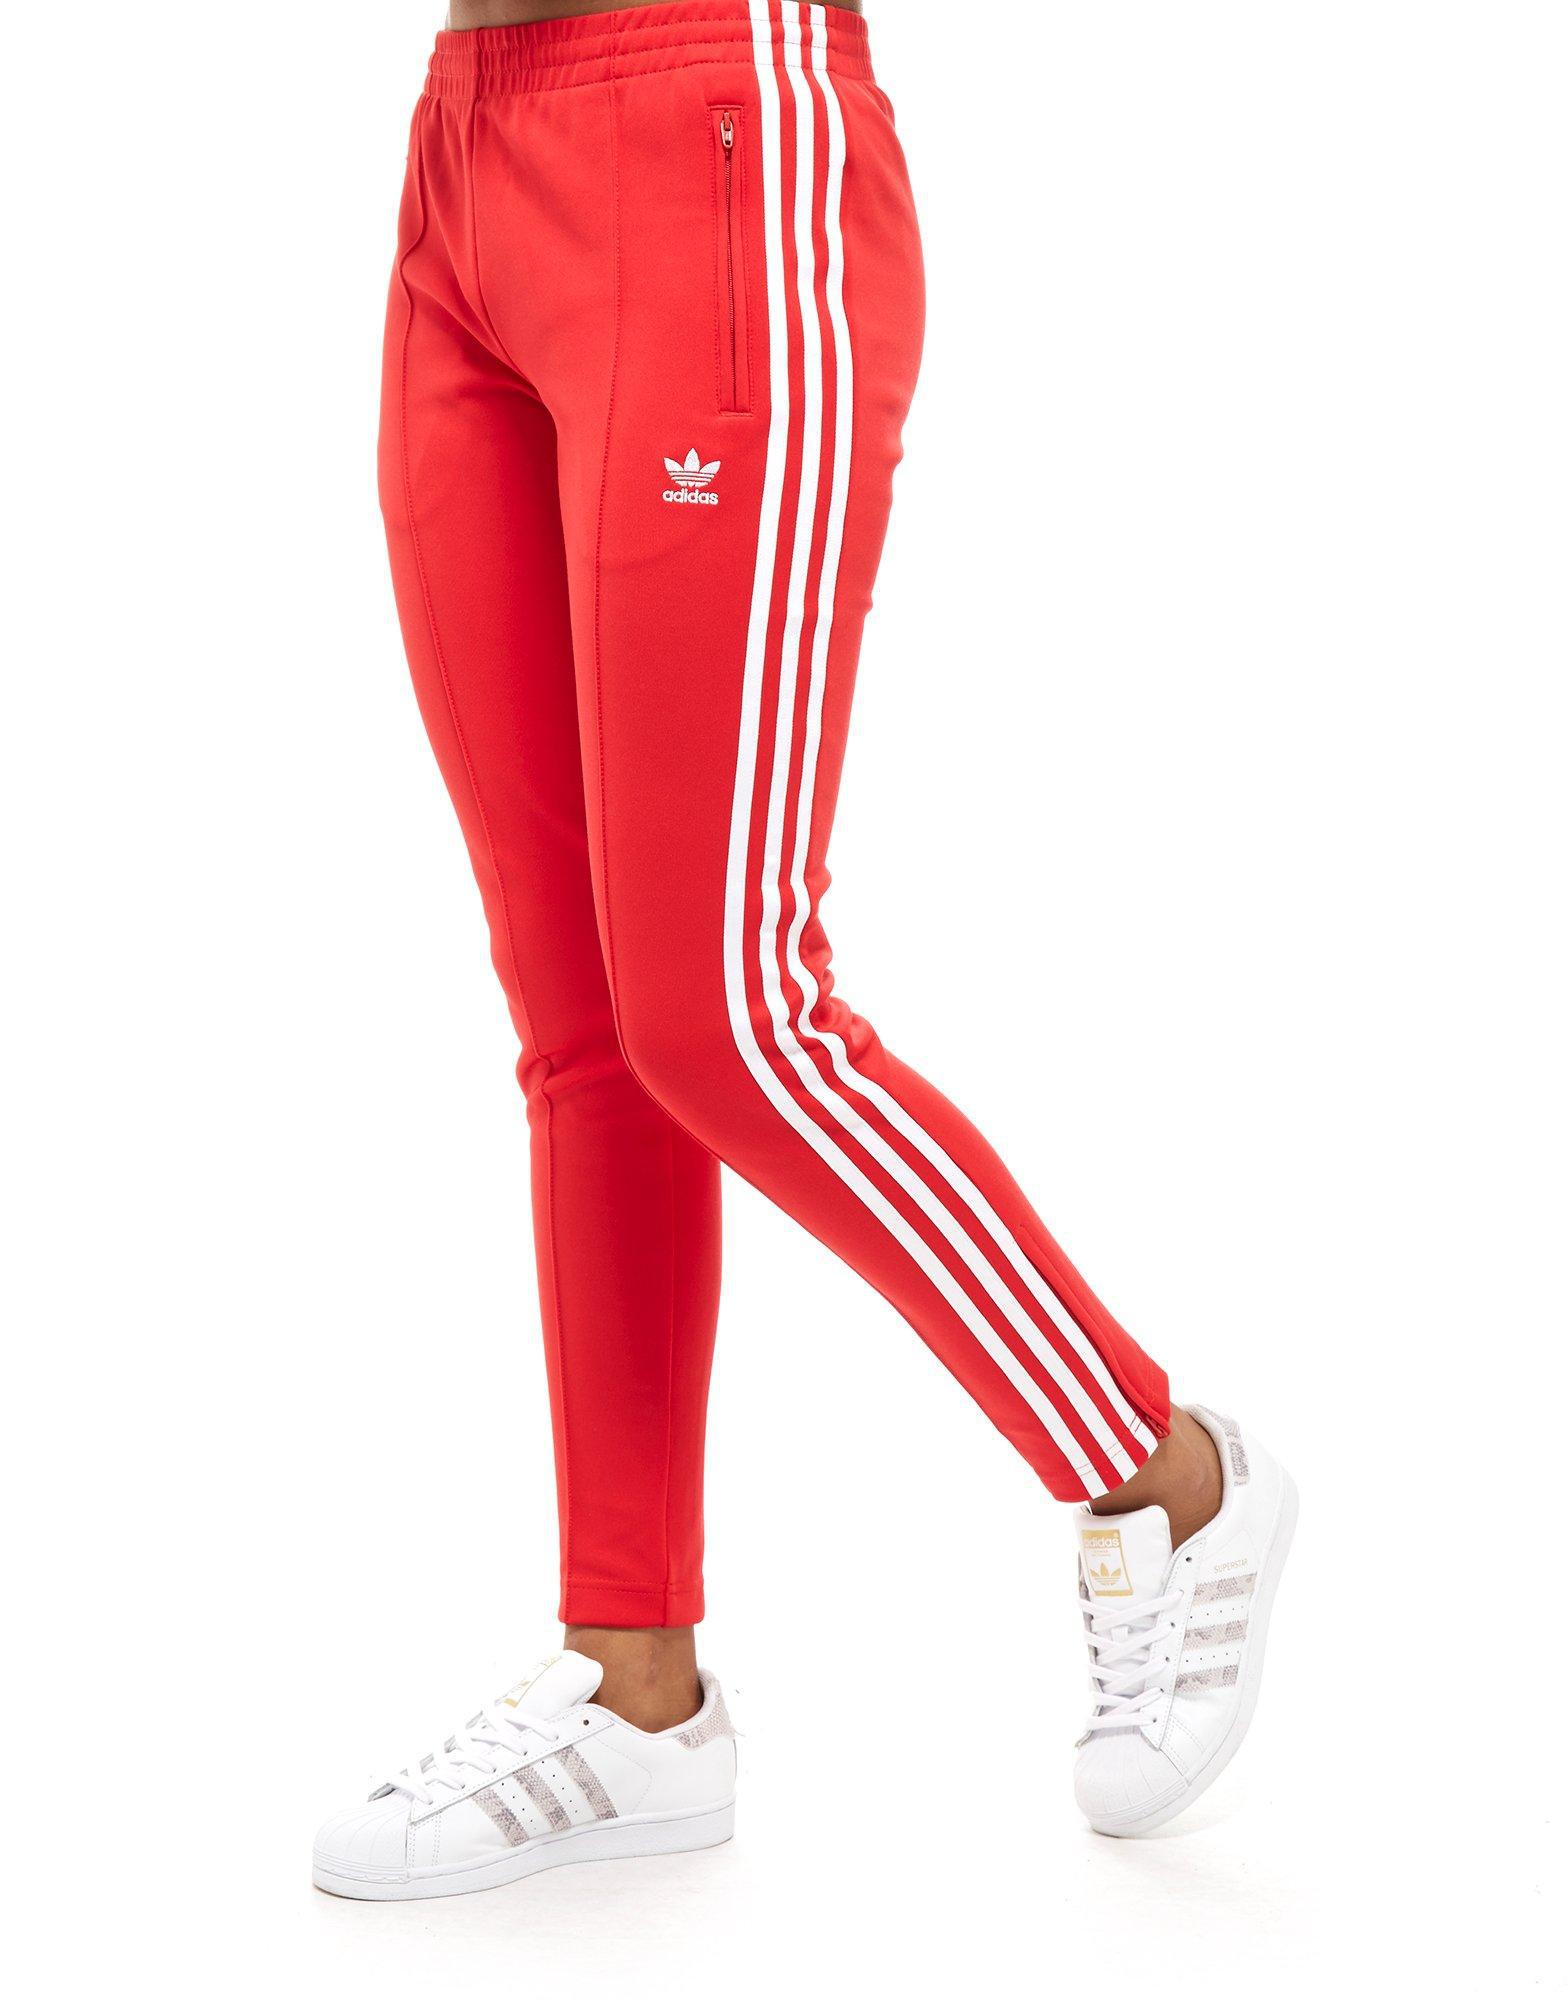 adidas superstar track pants red